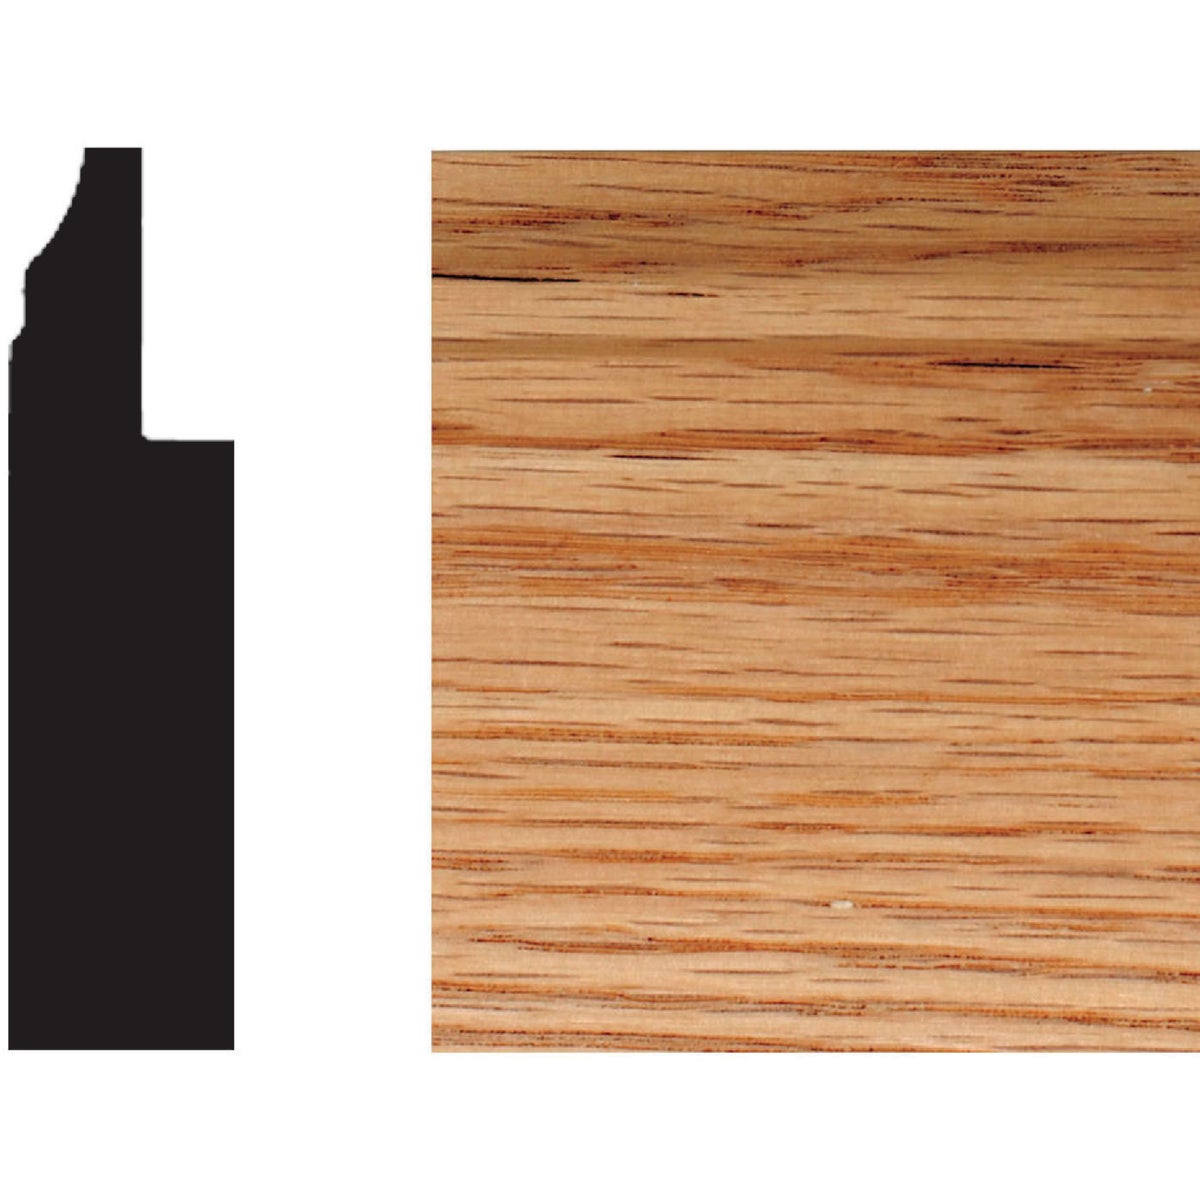 Item 181536, Red oak sanded smooth and ready-to-finish with stain or paint.